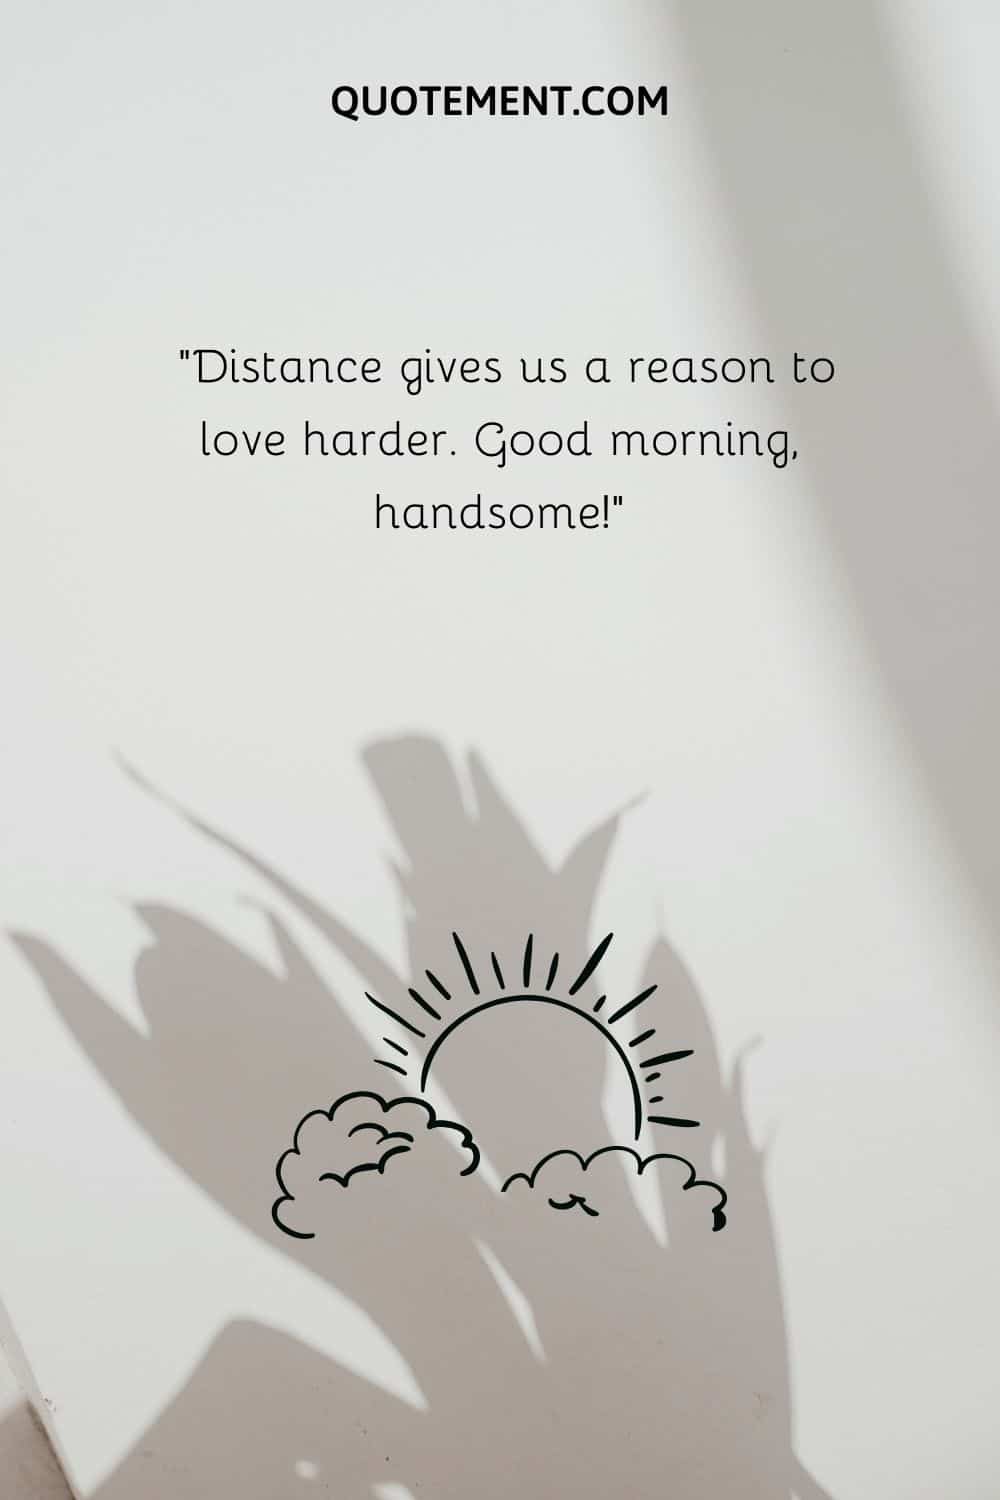 “Distance gives us a reason to love harder. Good morning, handsome!”